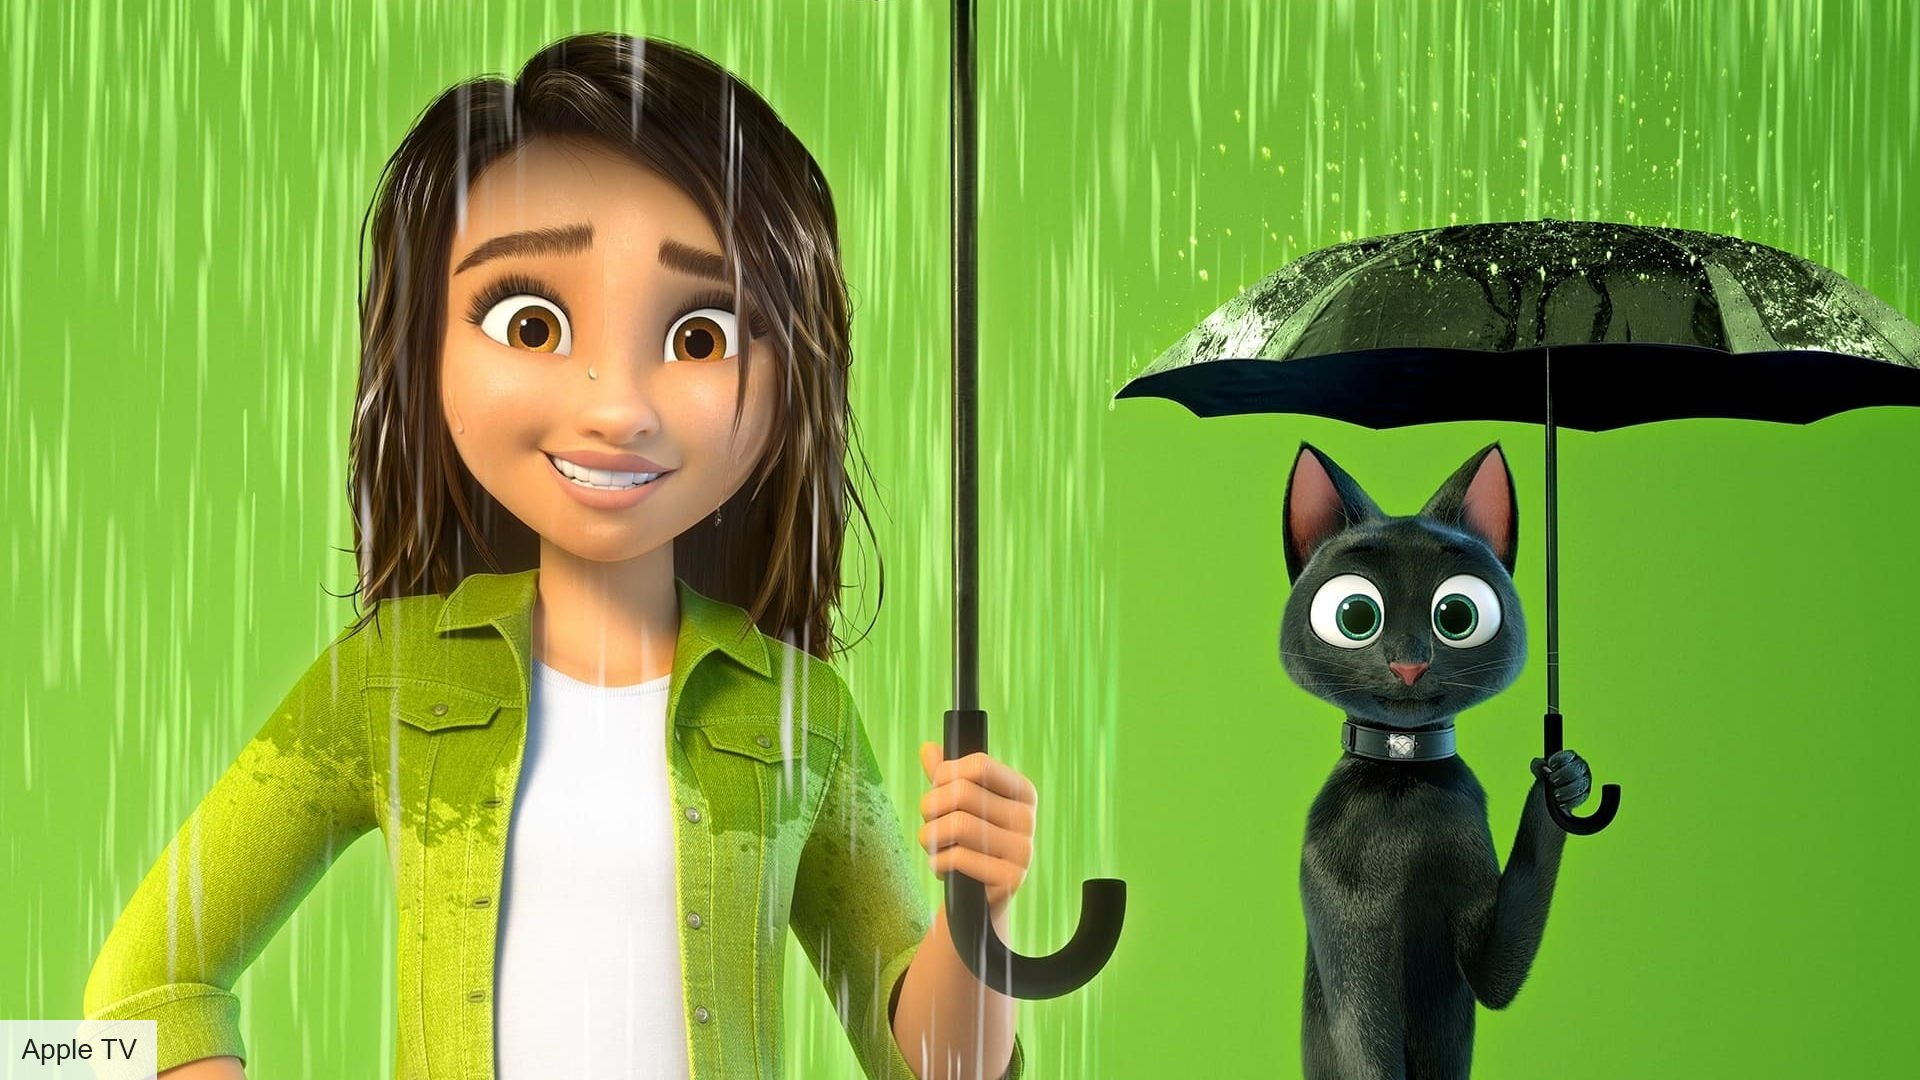 Character is key for Apple TV's new animated movie Luck | The Digital Fix